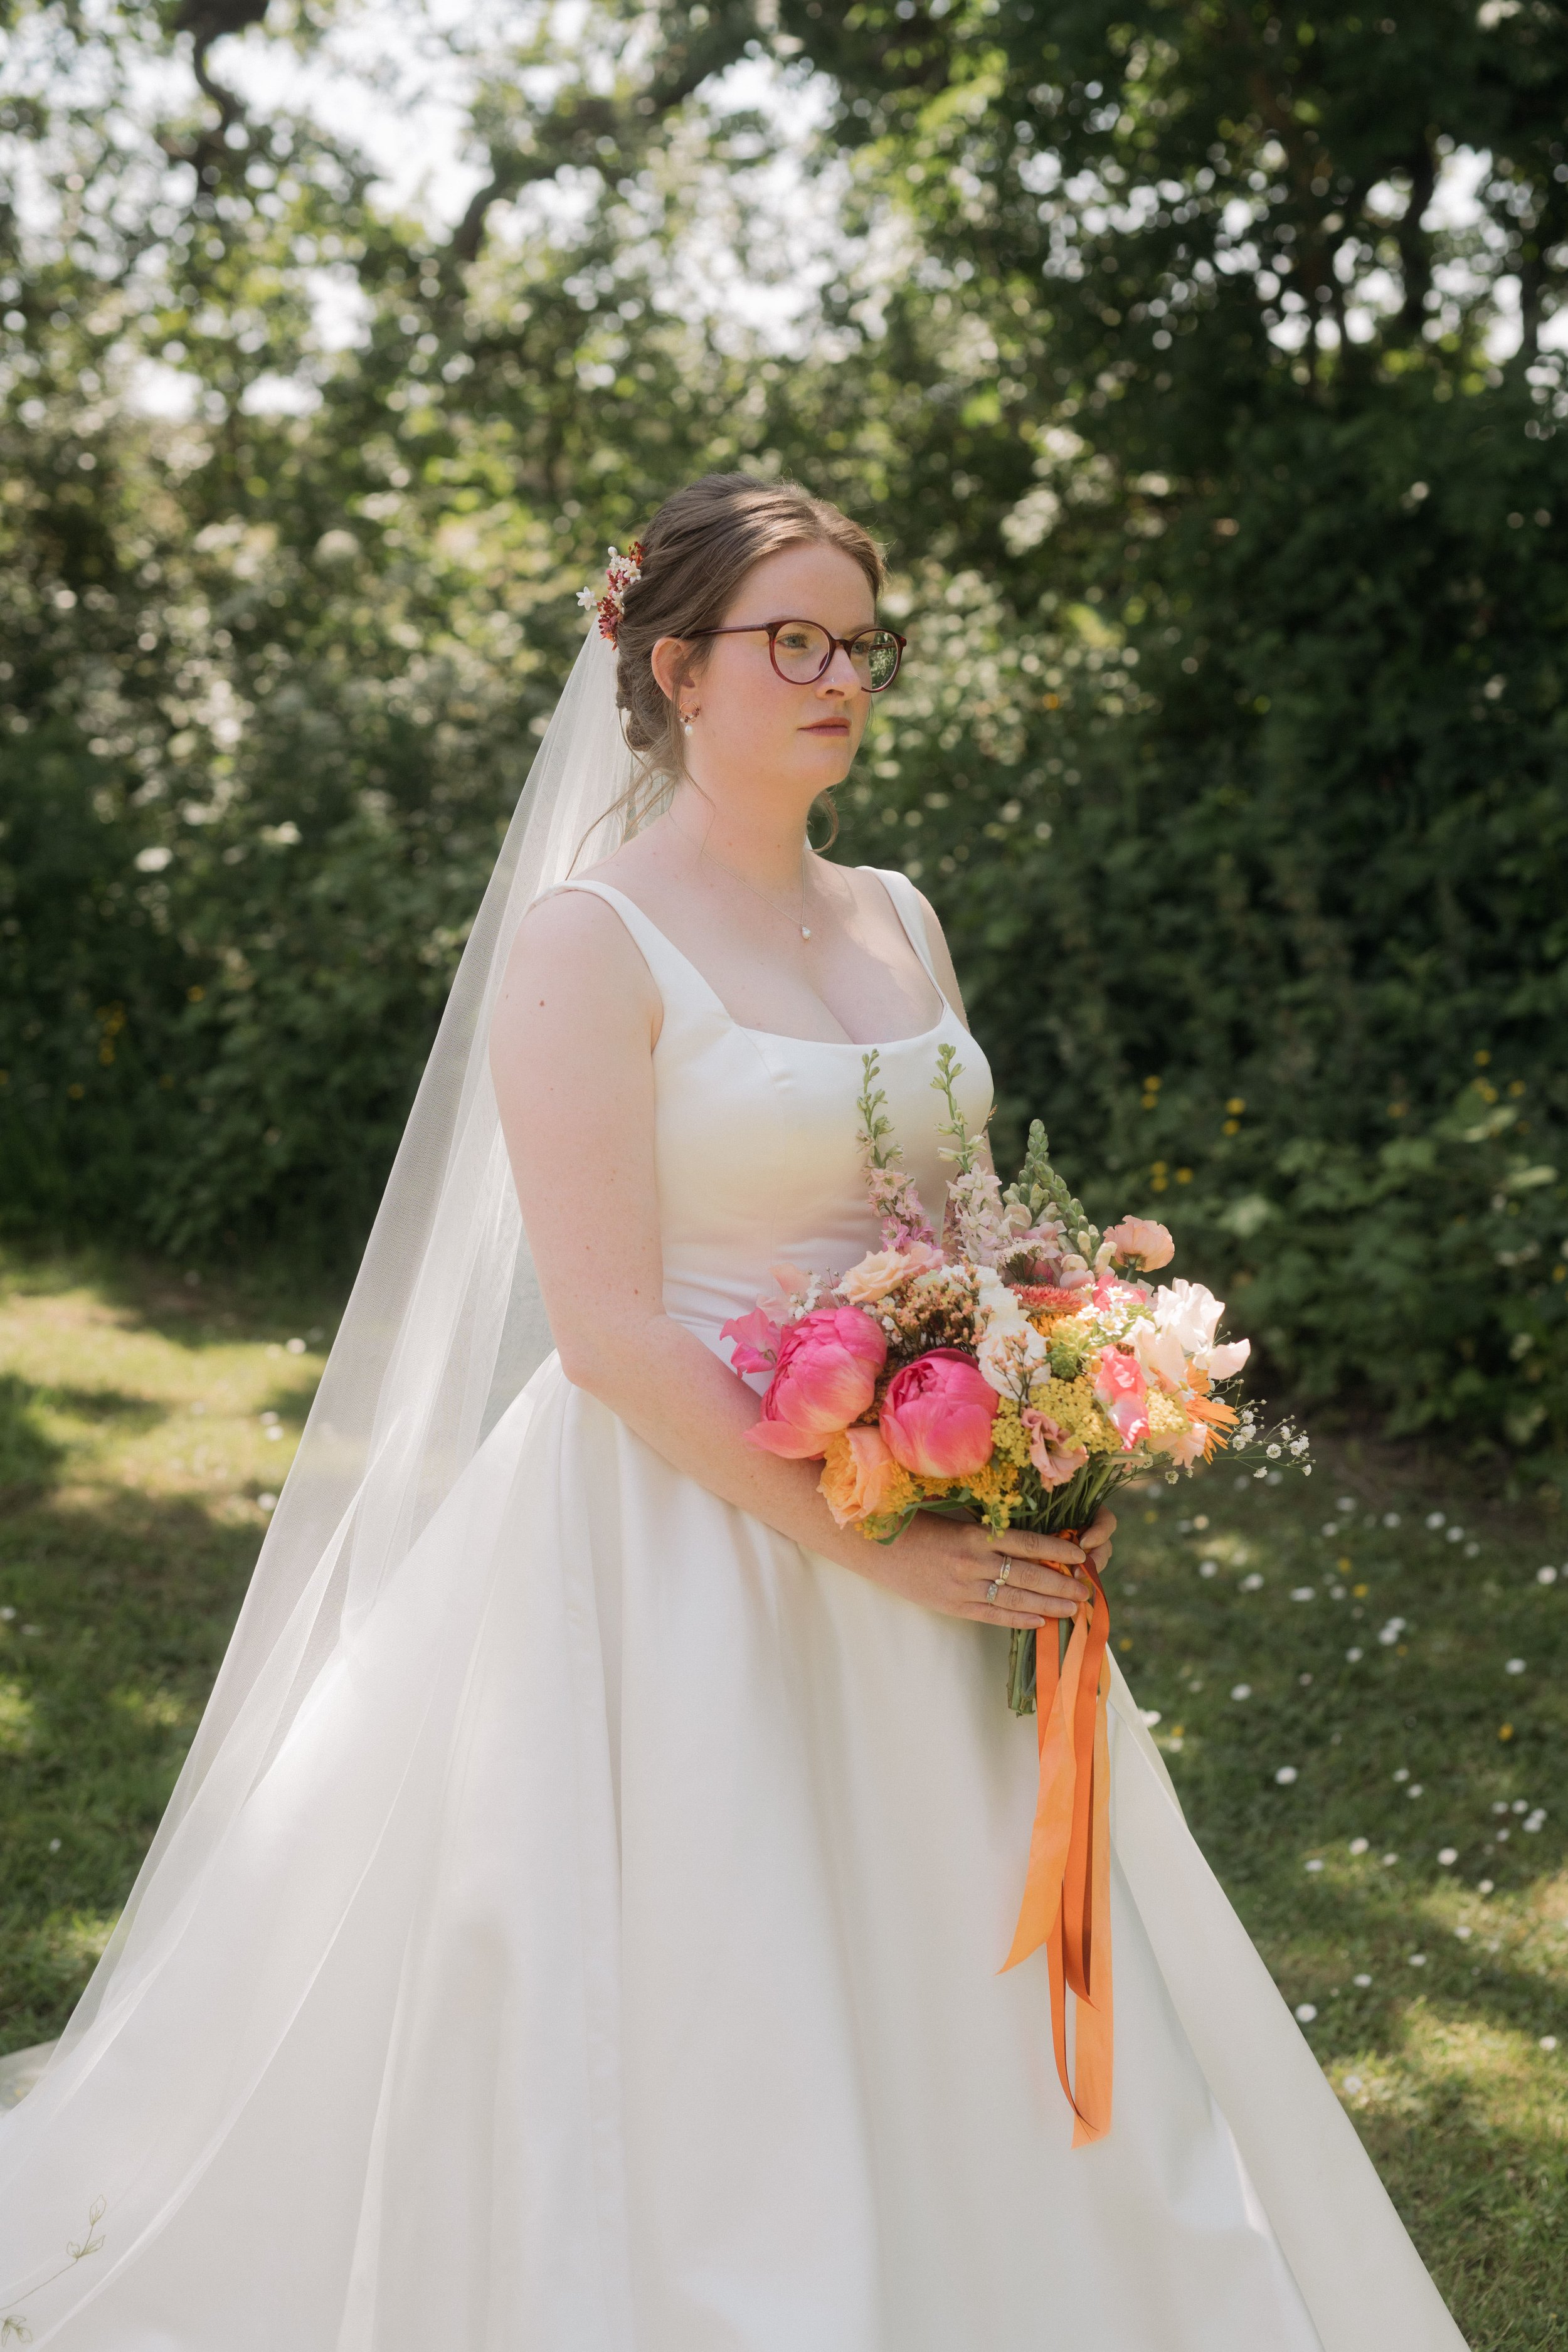  Bride posing with bouquet and veil 